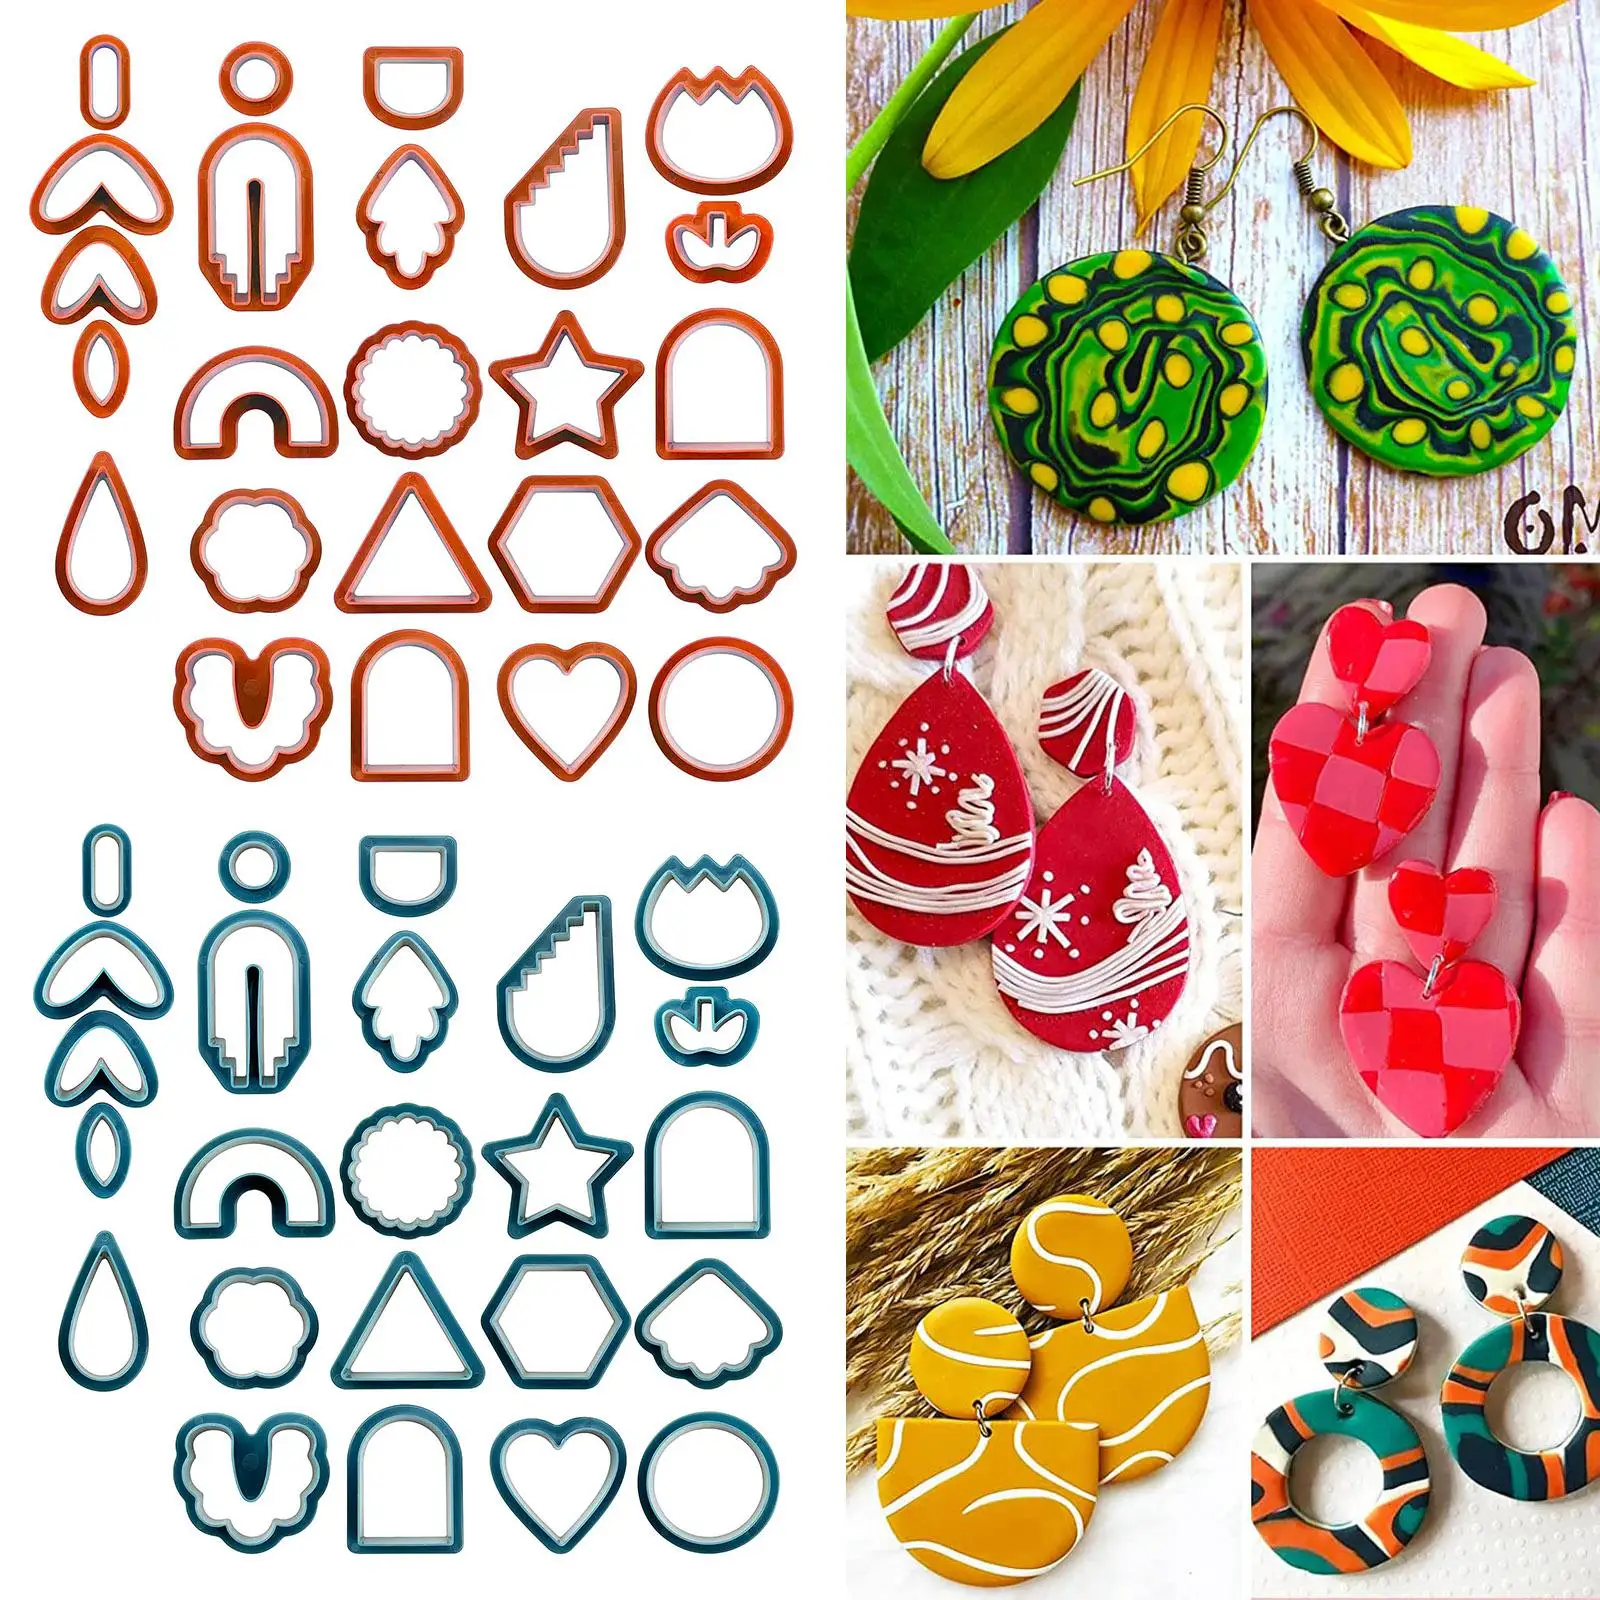 24x Polymer Clay Cutter Set Earring DIY Accessories Different Shapes Art Crafts Polymer Clay Jewelry DIY Kids Clay Cutting Tools